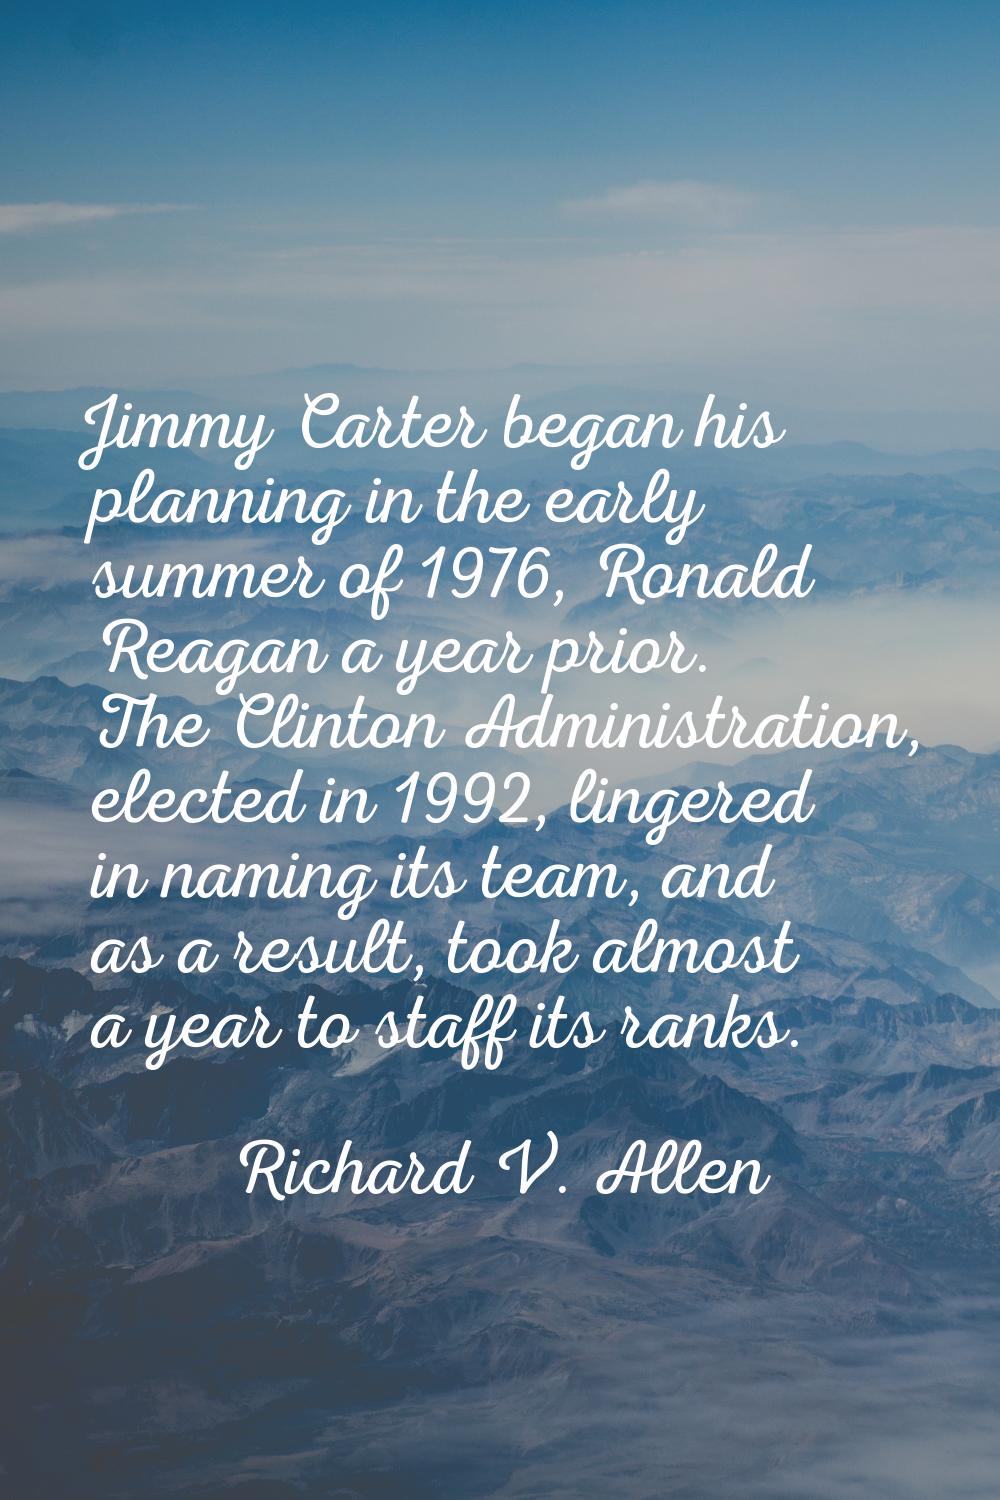 Jimmy Carter began his planning in the early summer of 1976, Ronald Reagan a year prior. The Clinto